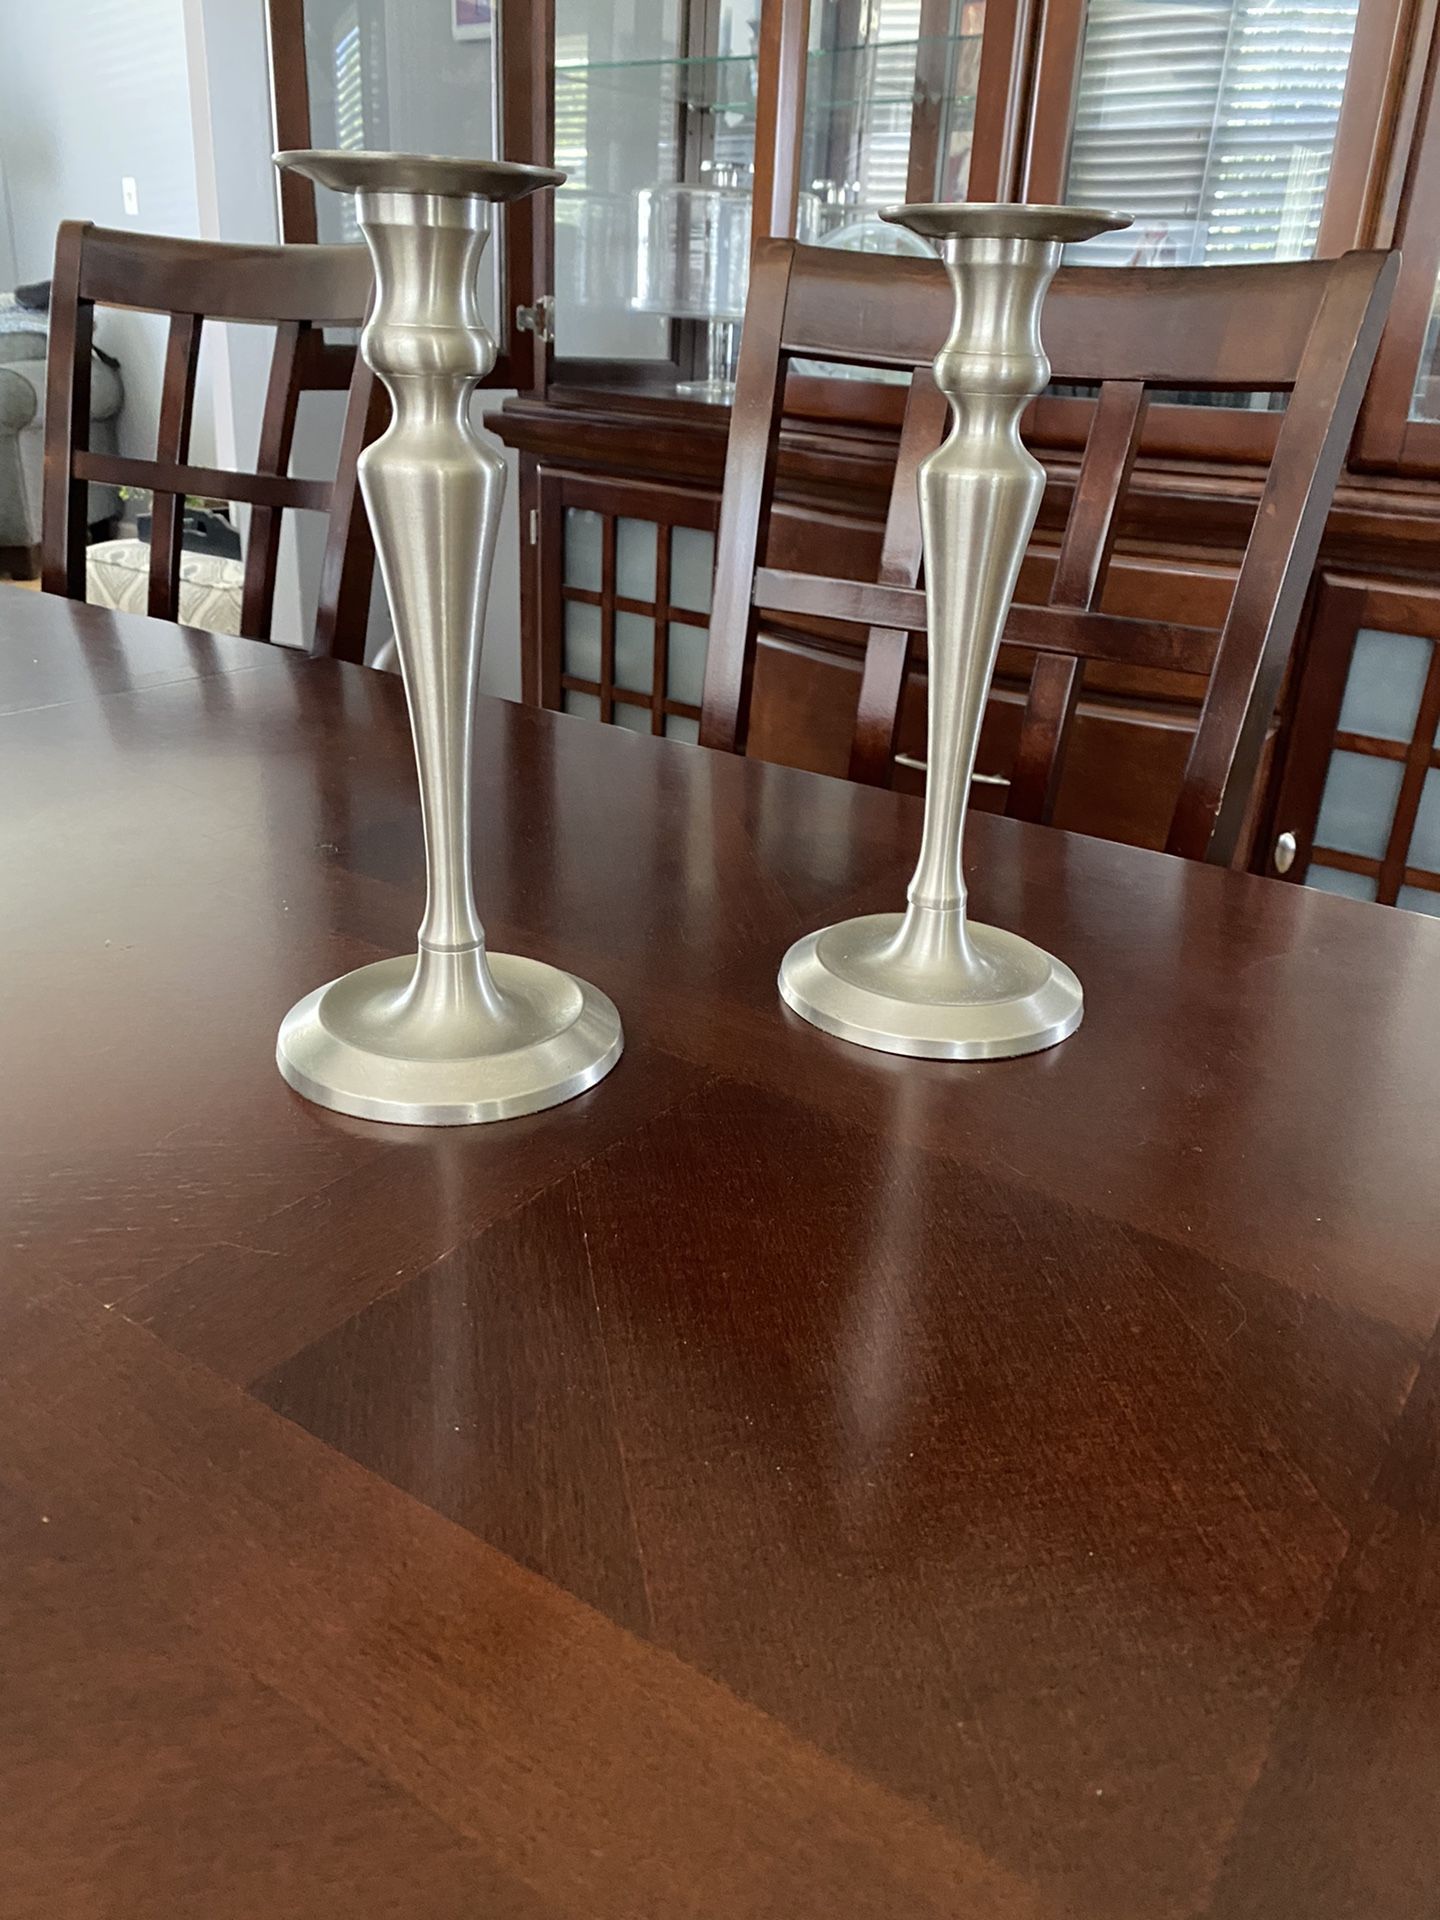 Silver Candle Sticks 